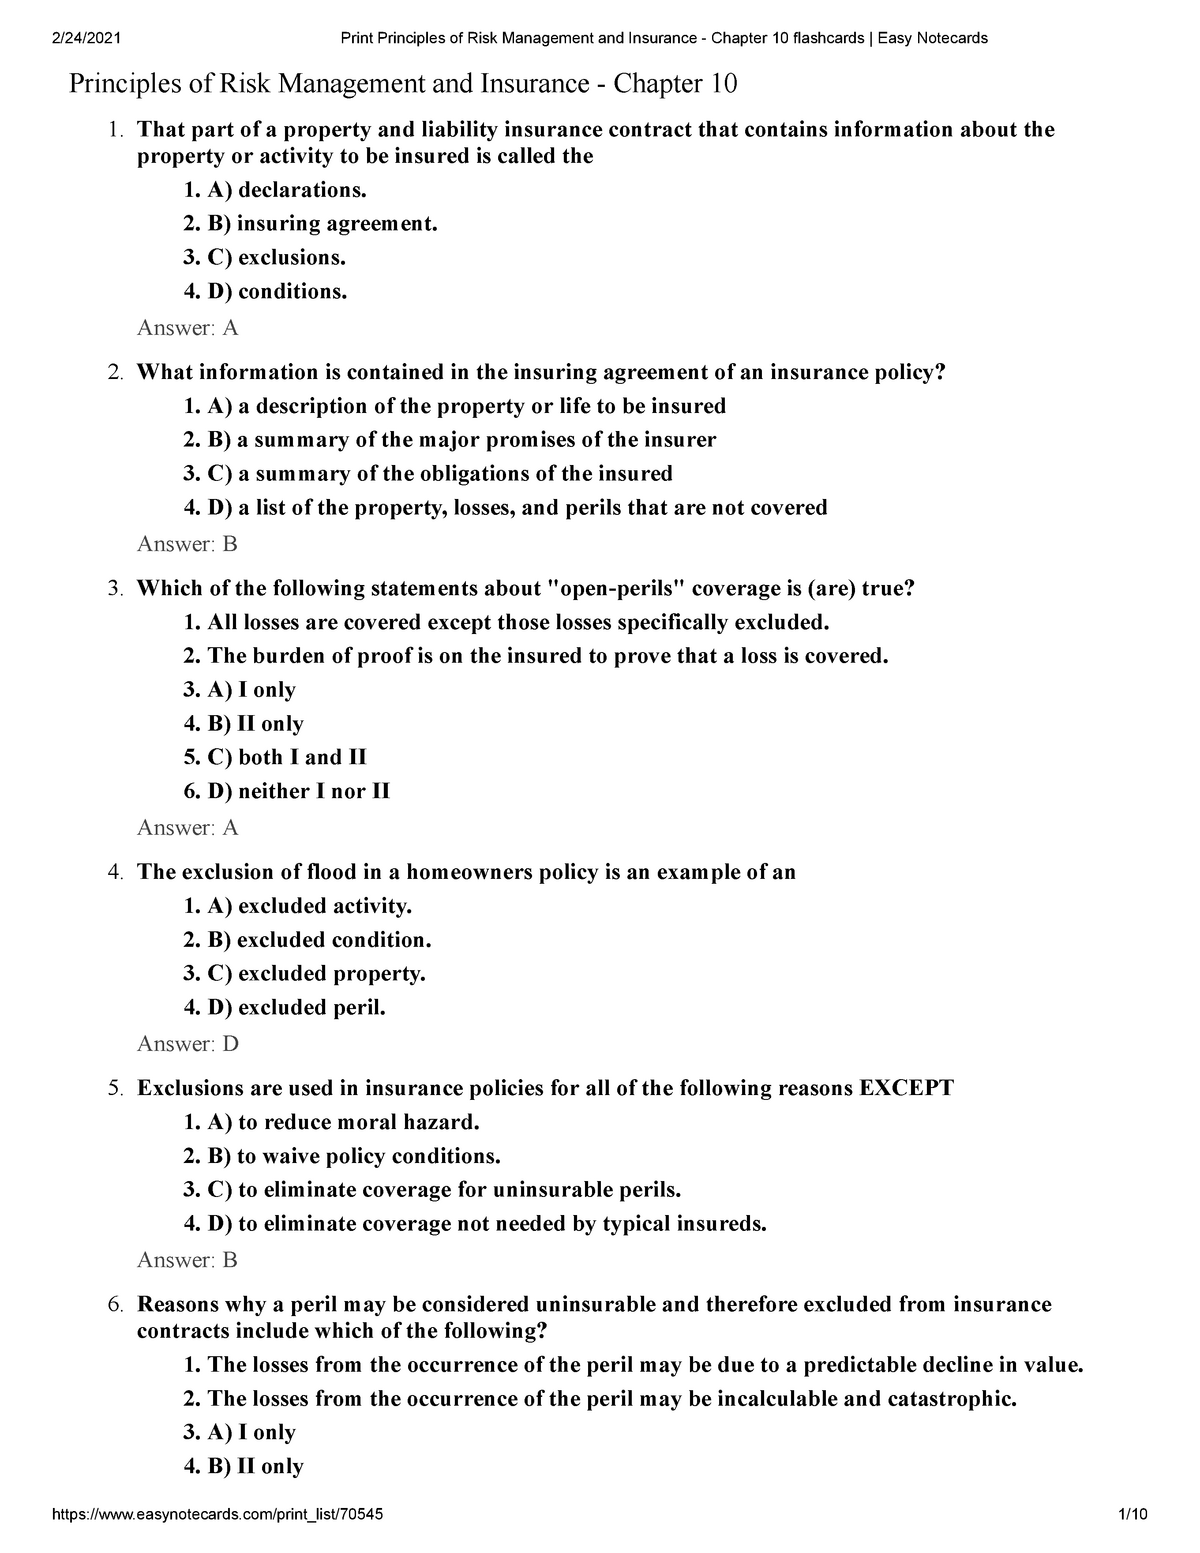 Chapter 10 Practical Questions Headed To International Finance 1 2 3 4 5 6 Principles Of Studocu